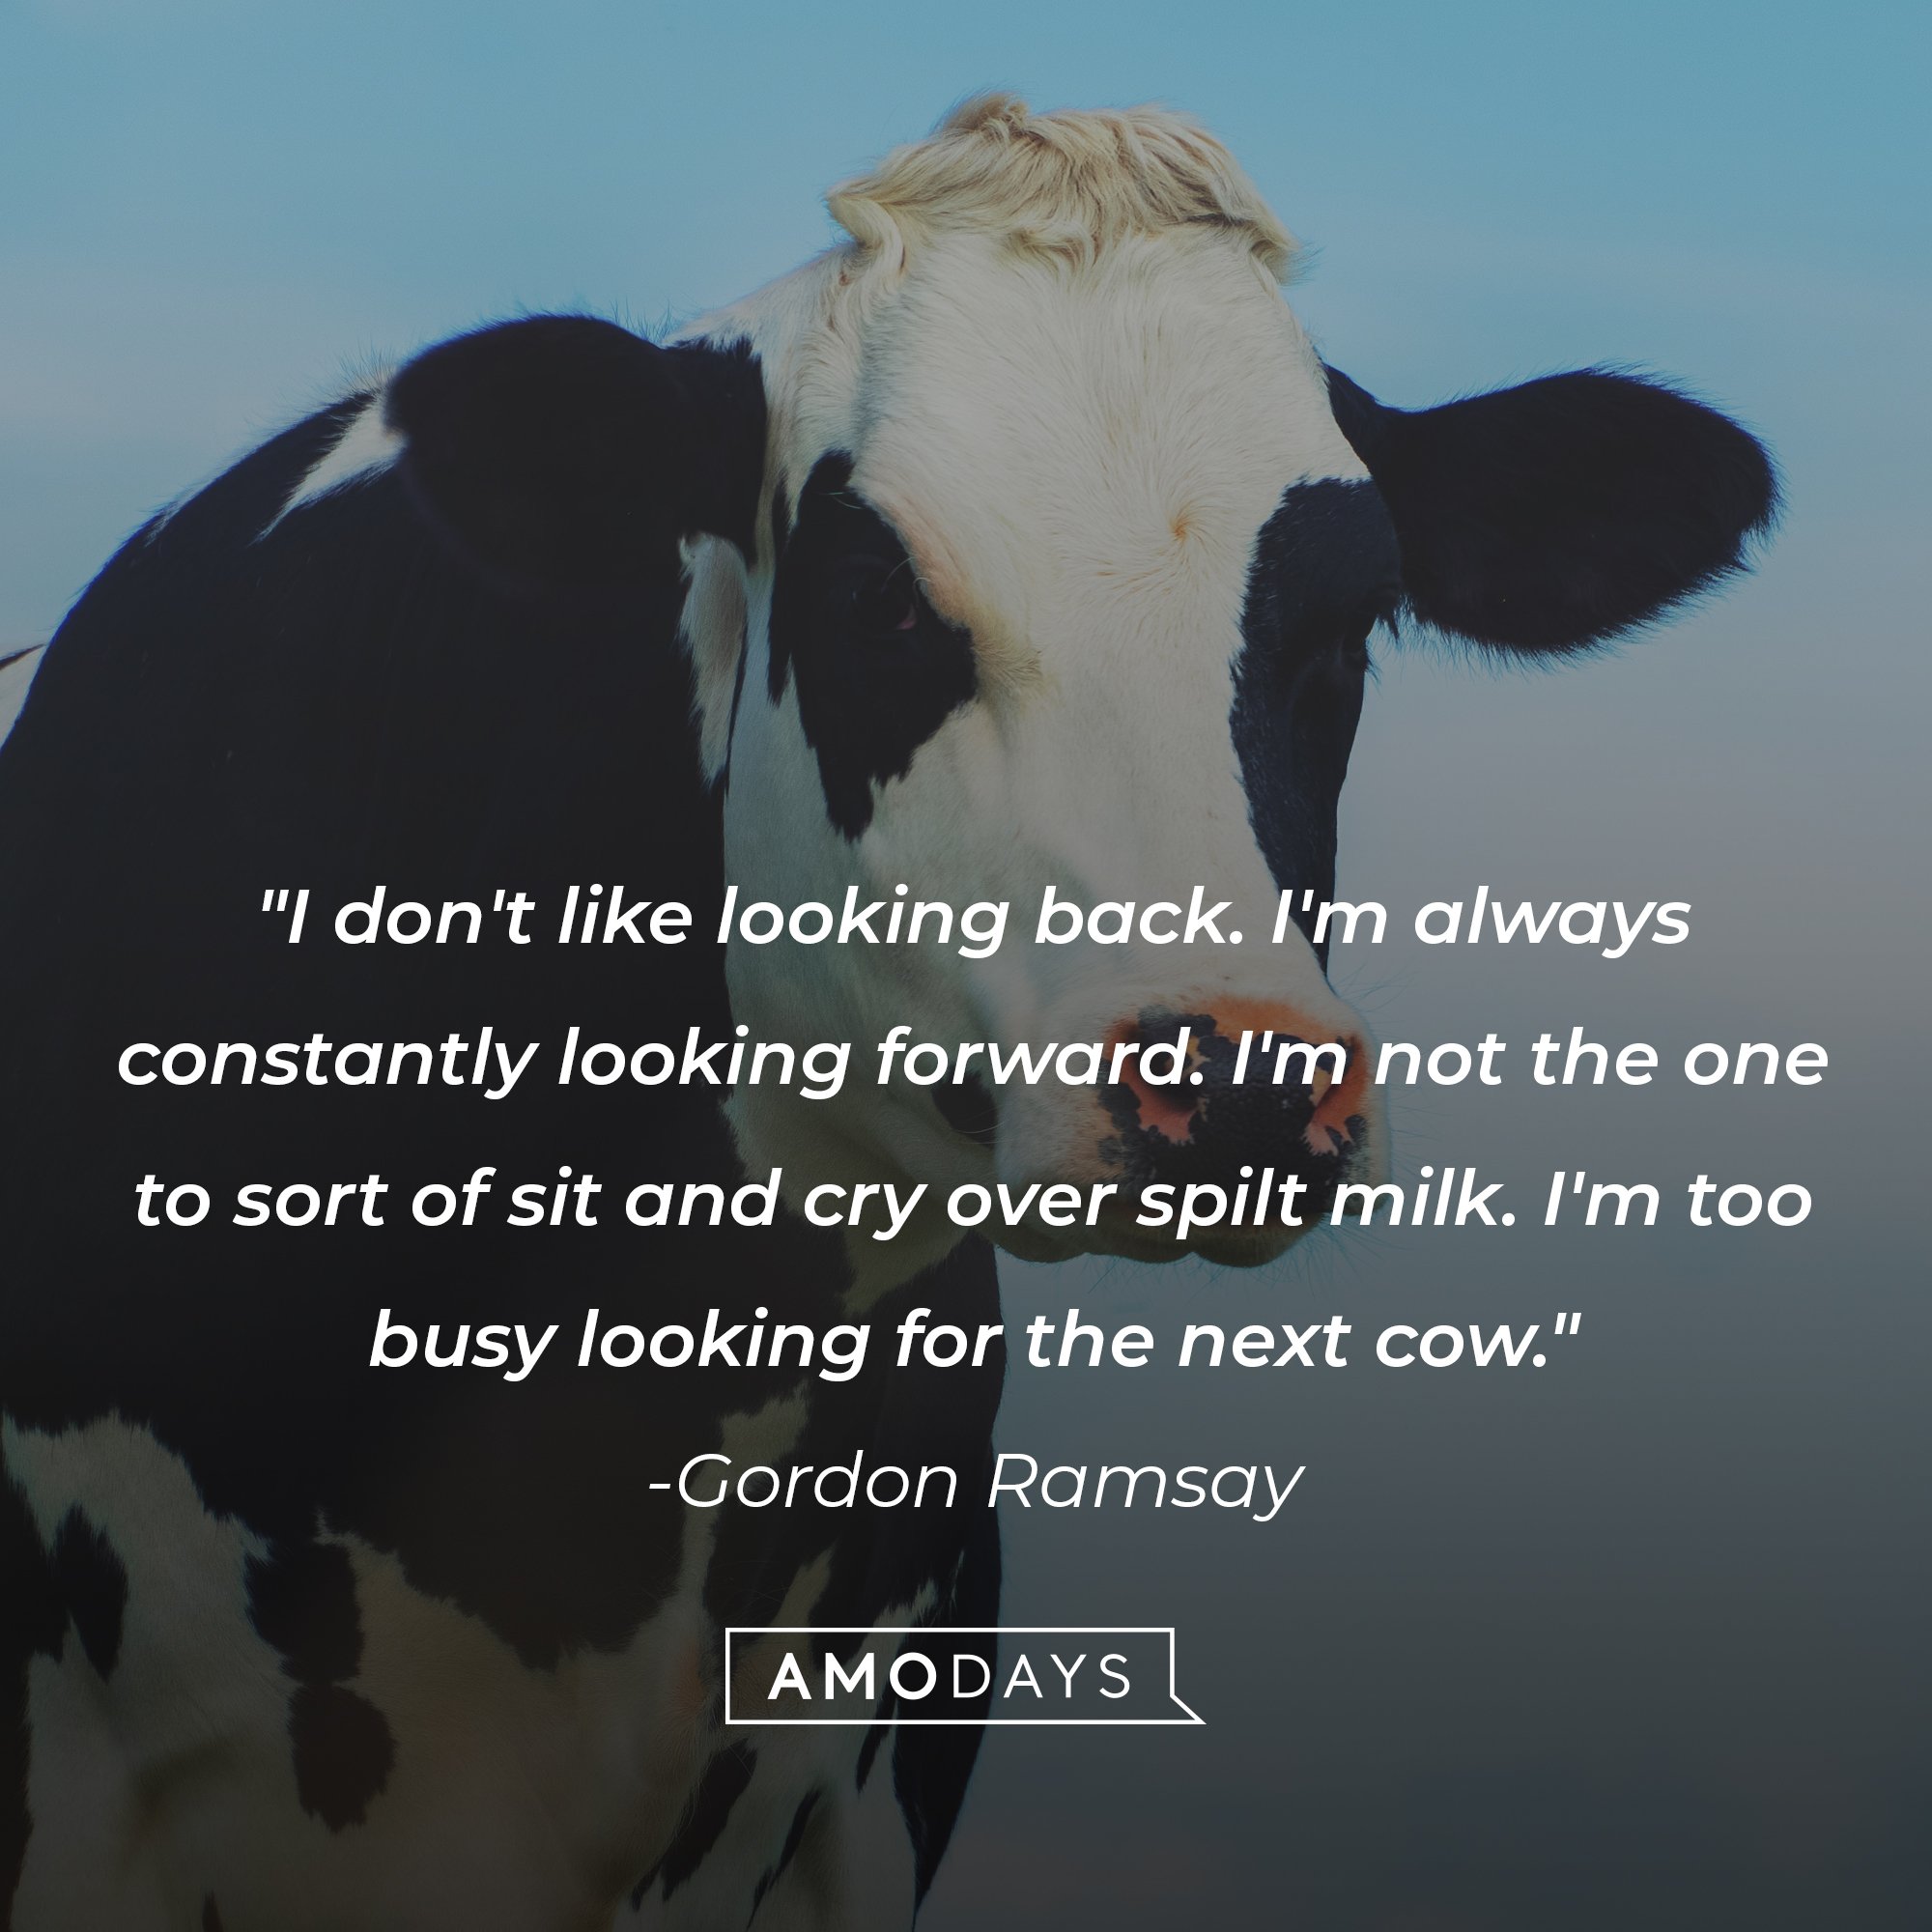 Gordon Ramsay’s quote: "I don't like looking back. I'm always constantly looking forward. I'm not the one to sort of sit and cry over spilt milk. I'm too busy looking for the next cow."  | Image: AmoDays